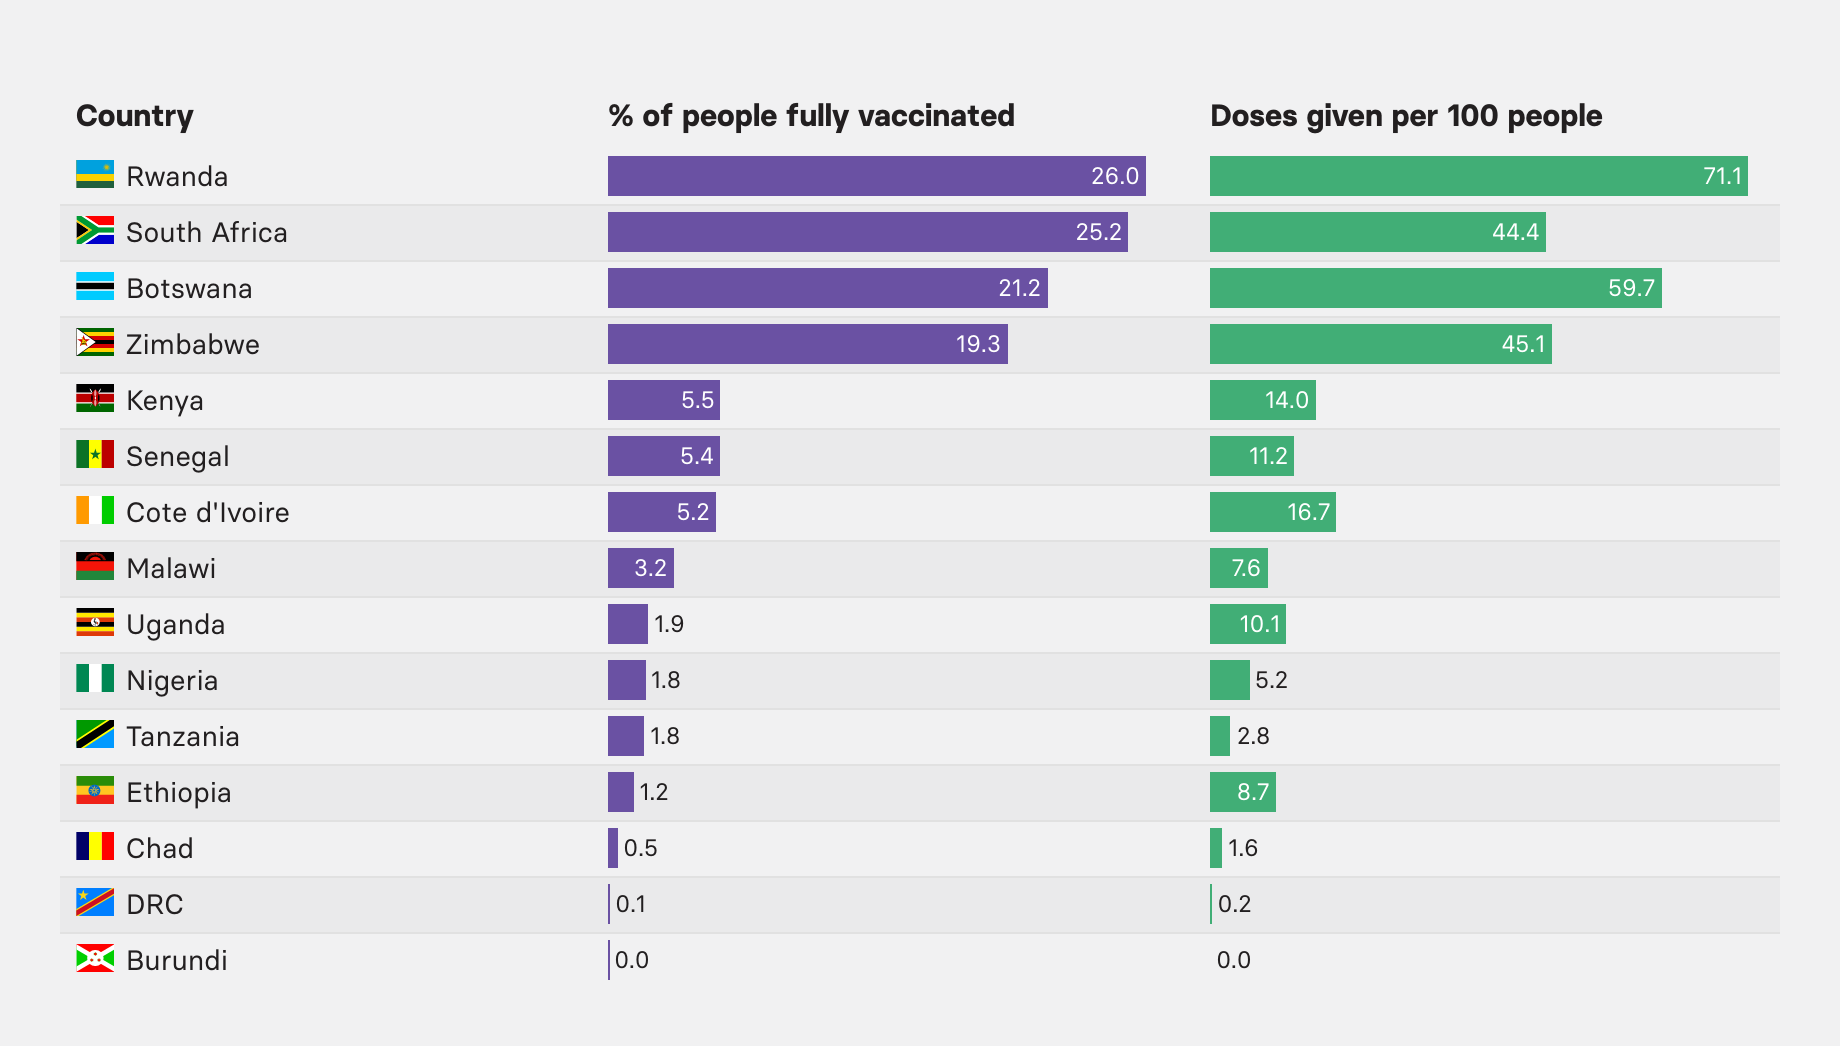 Bar charts showing the wide disparity in vaccine rollout across different African nations